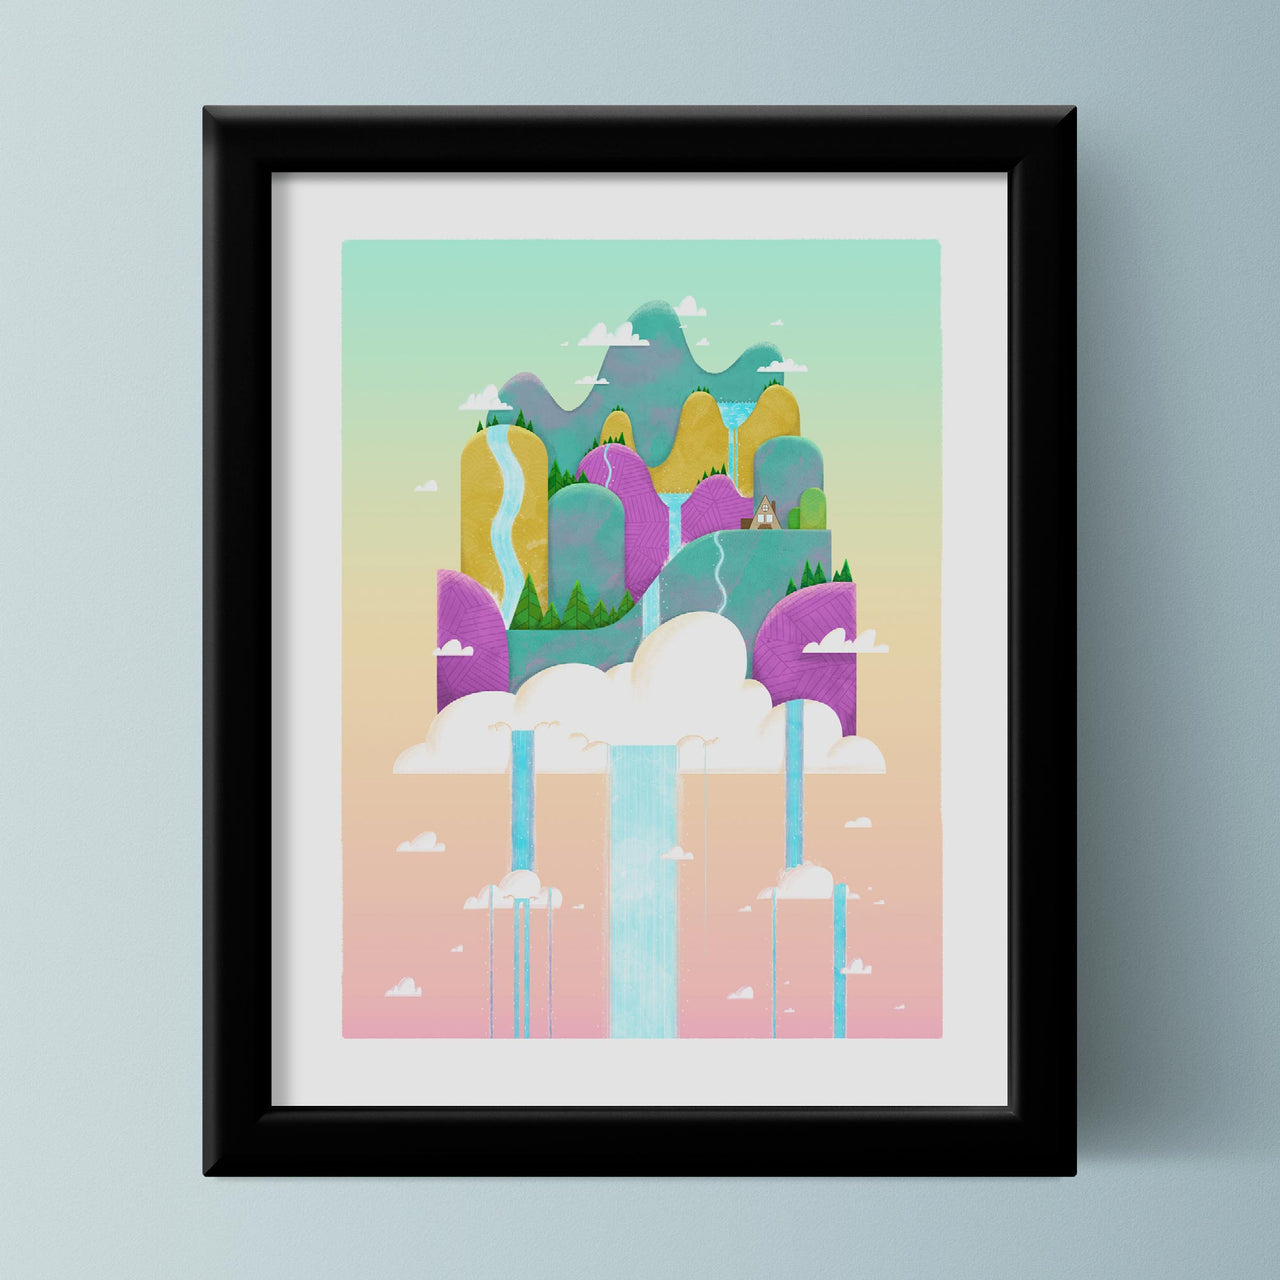 Island in the Clouds: Day | 11x14 Unframed Art Print